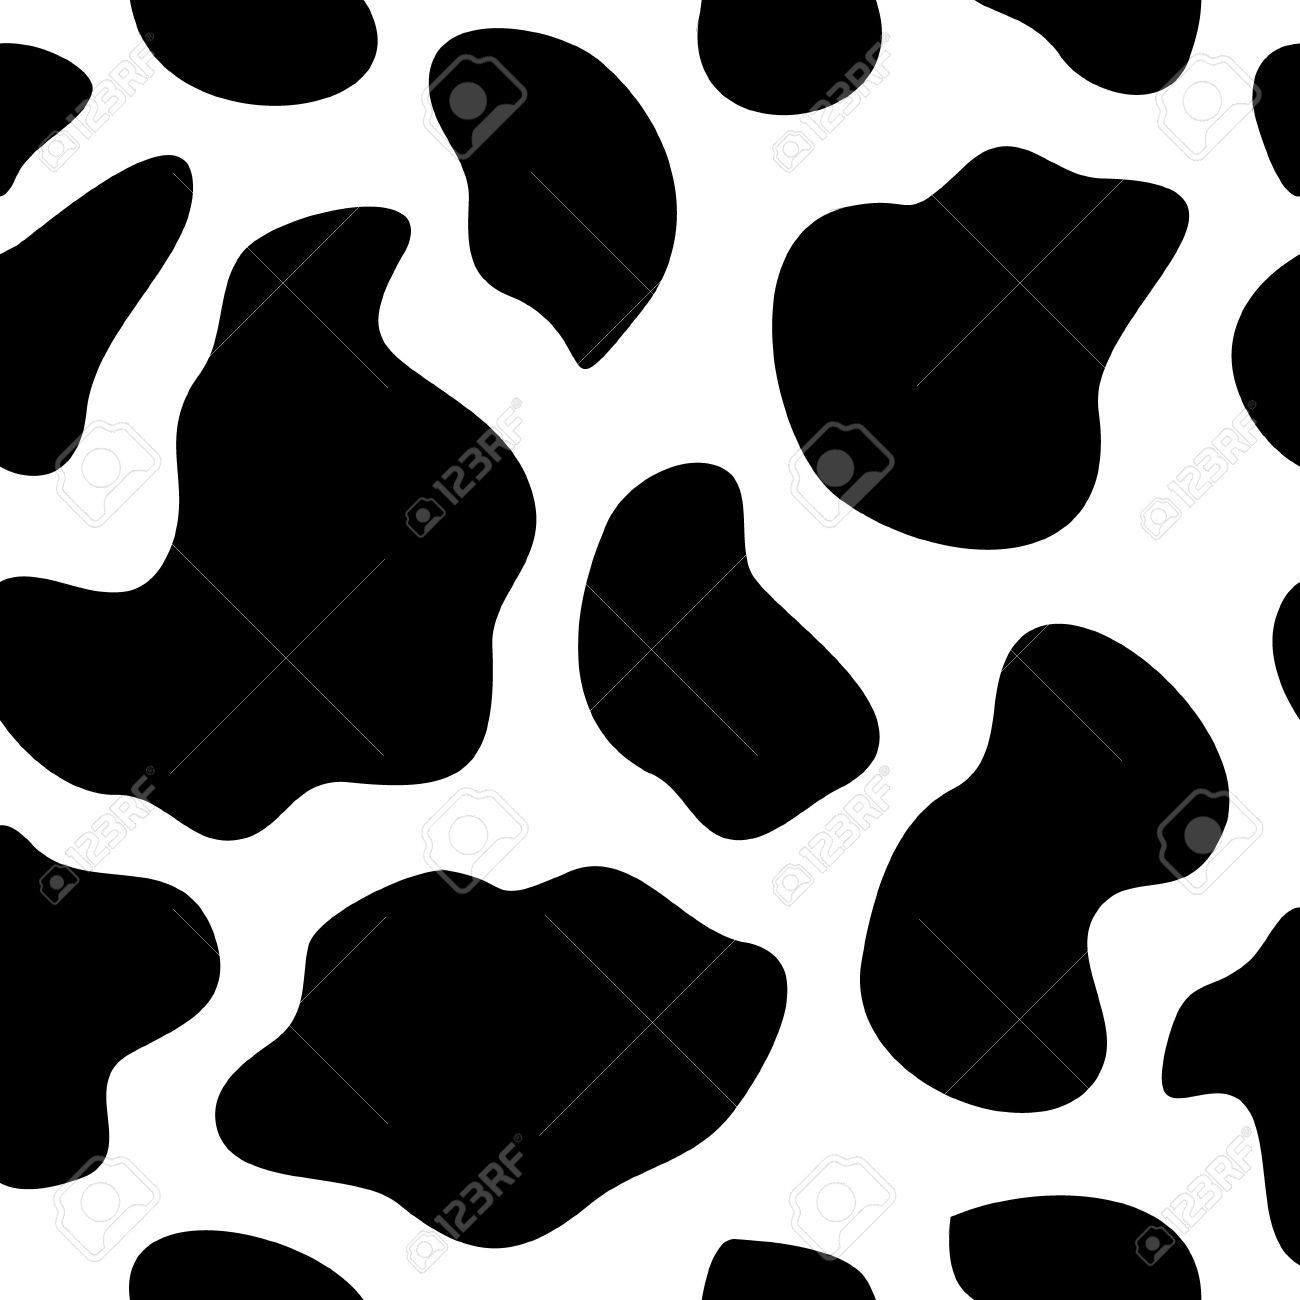 cow pattern clipart - photo #18